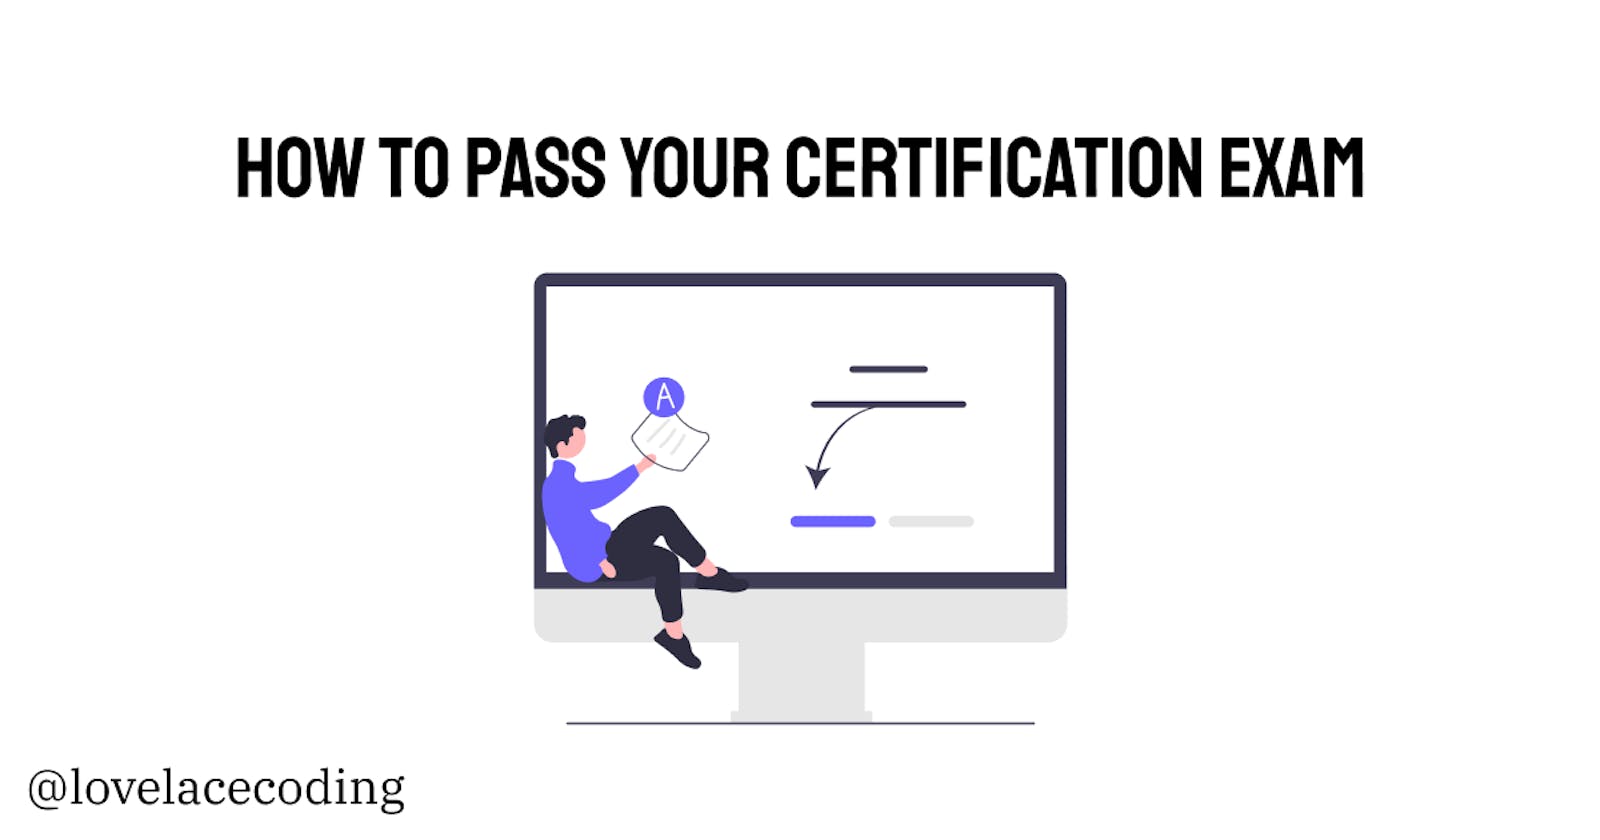 How to Pass Your Certification Exam